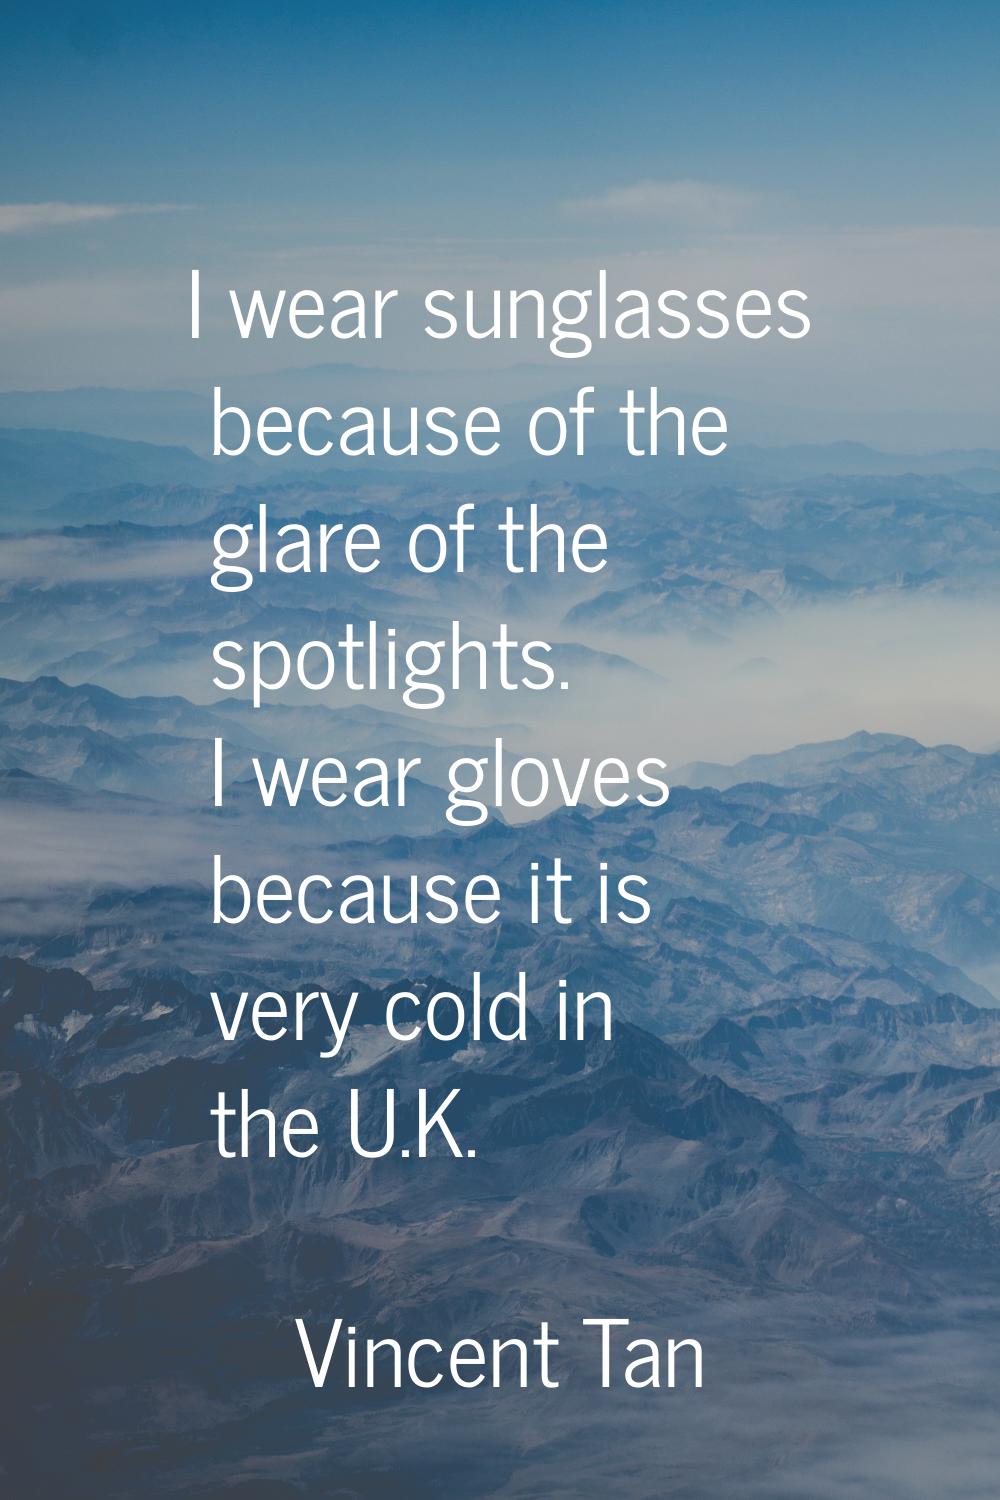 I wear sunglasses because of the glare of the spotlights. I wear gloves because it is very cold in 